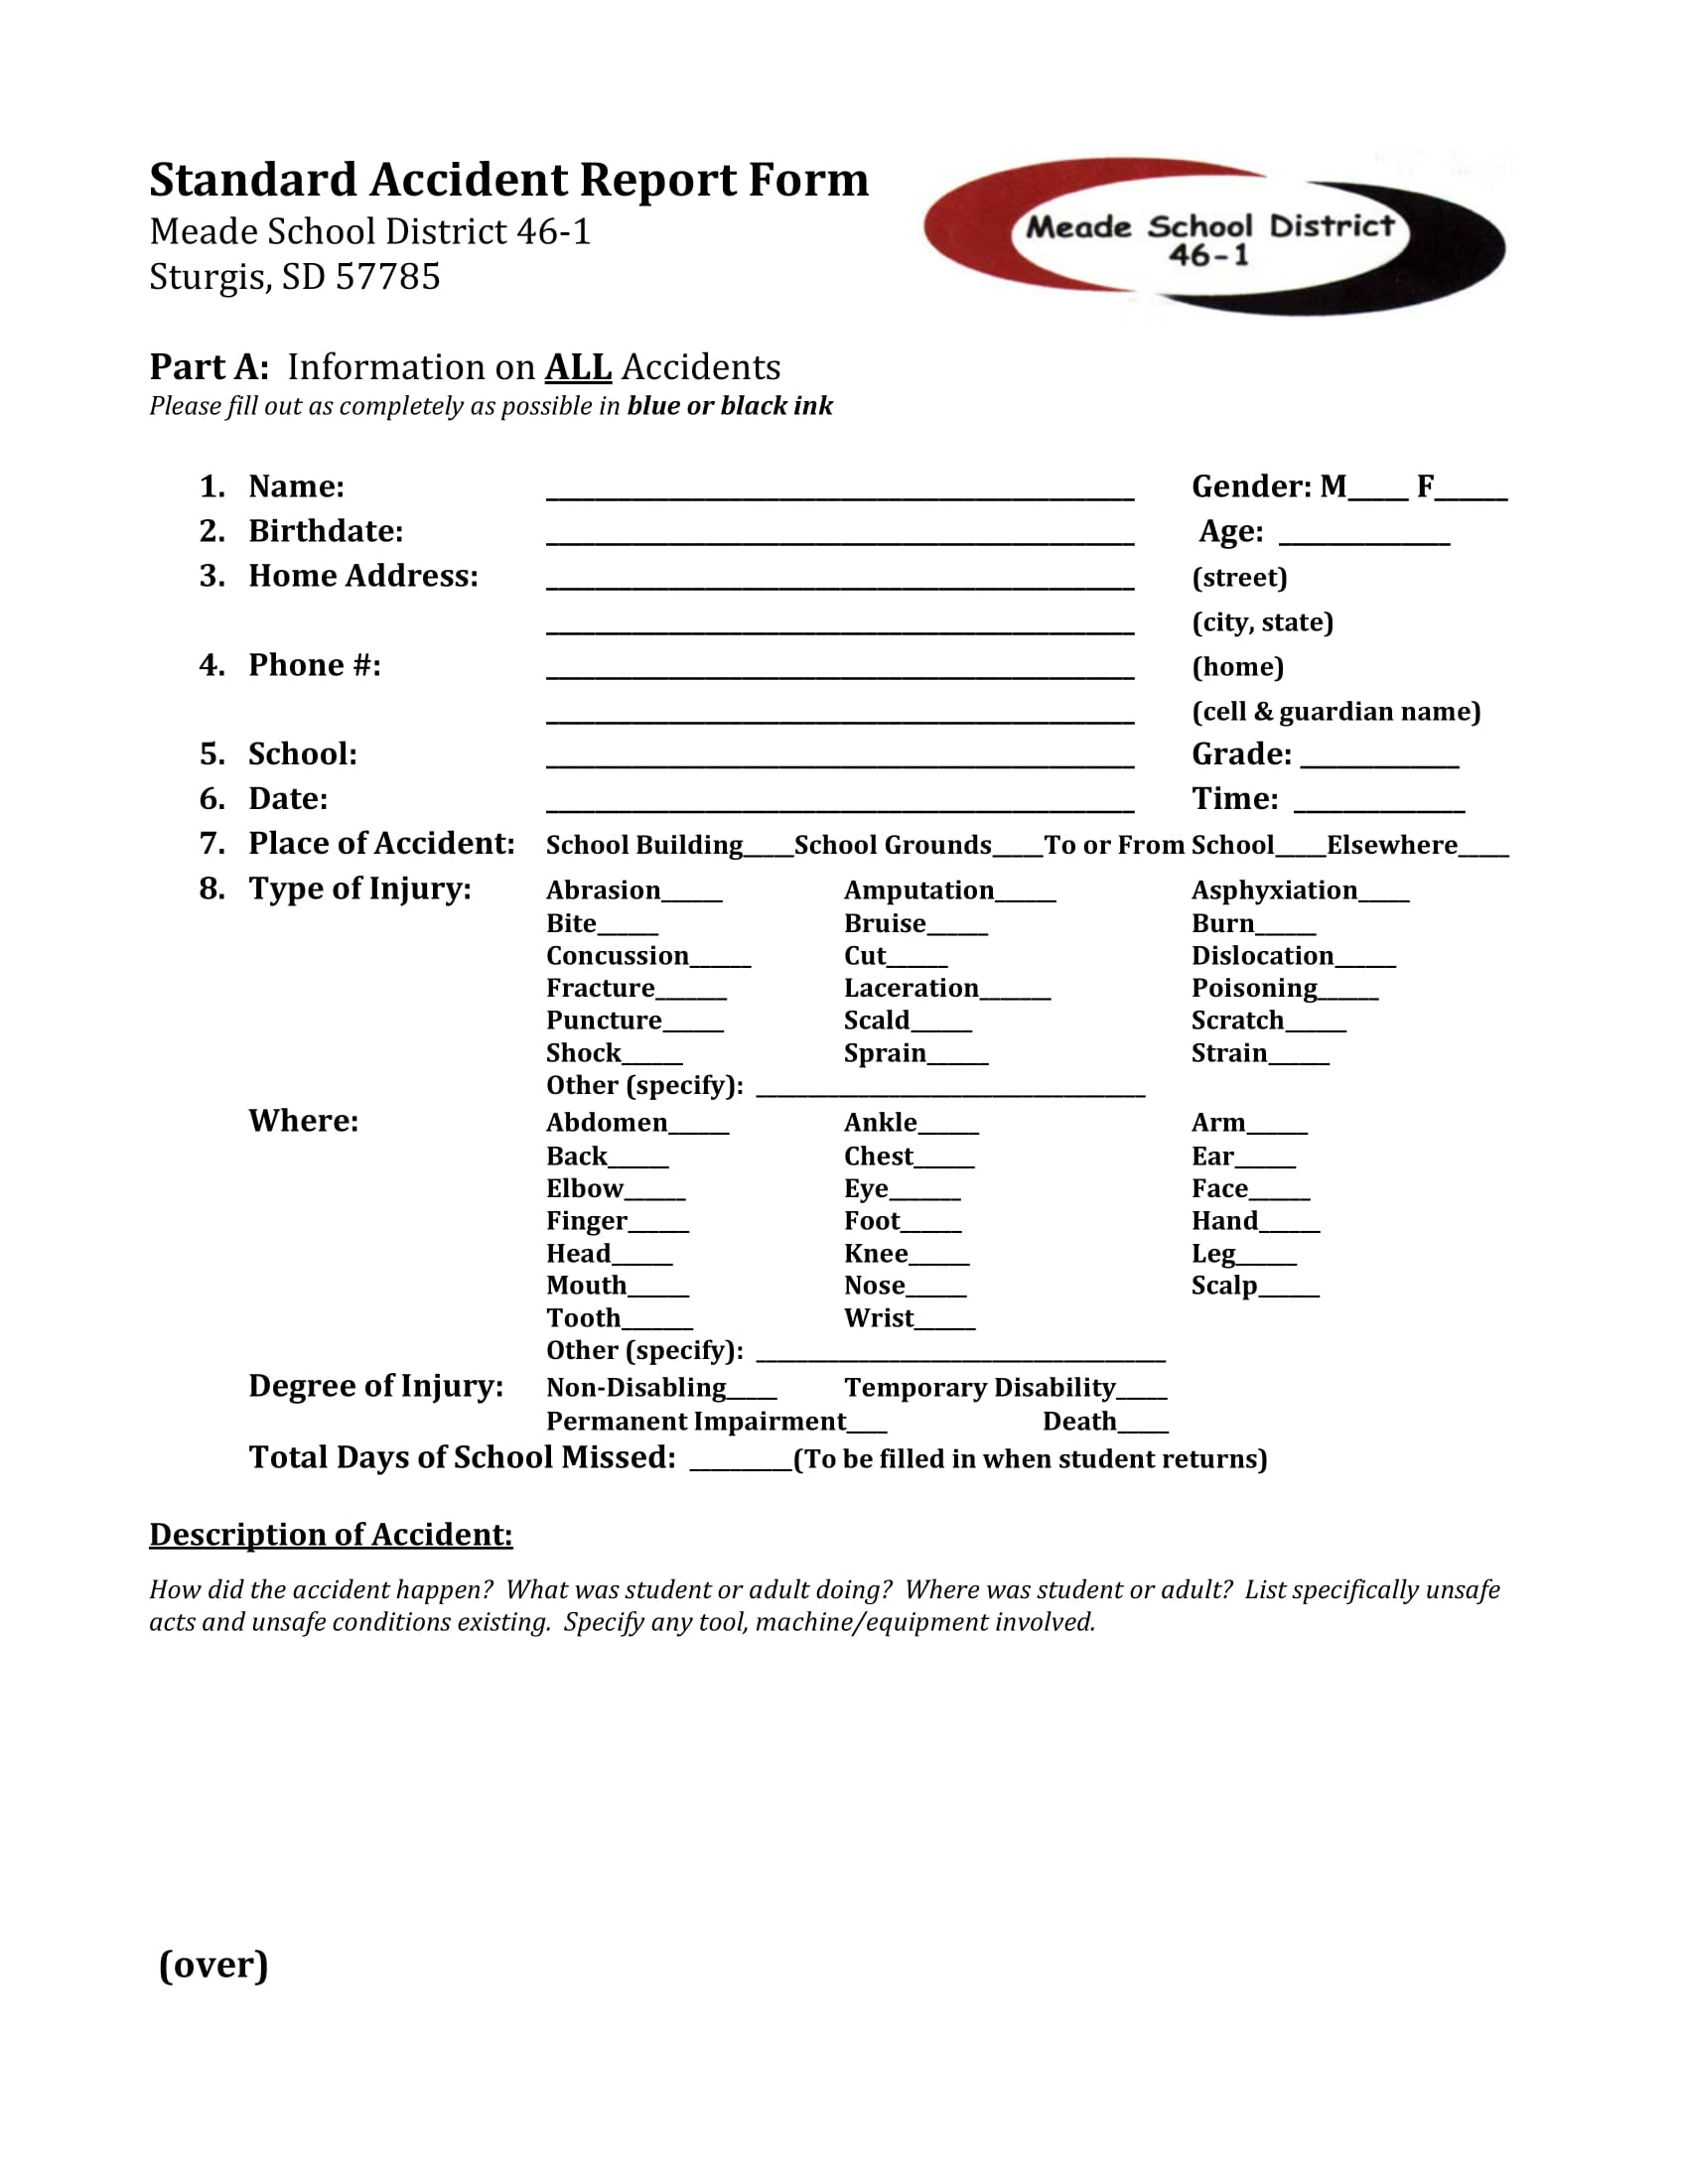 standard accident report form 1